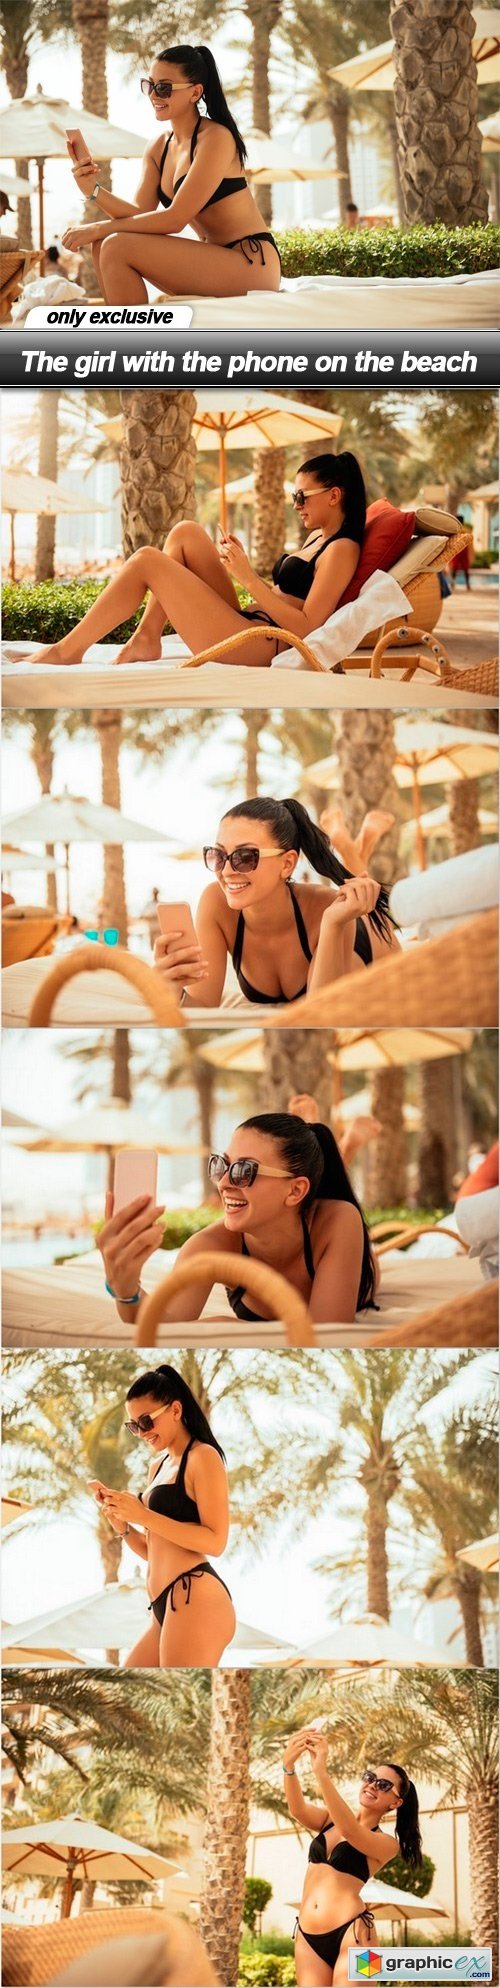 The girl with the phone on the beach - 6 UHQ JPEG